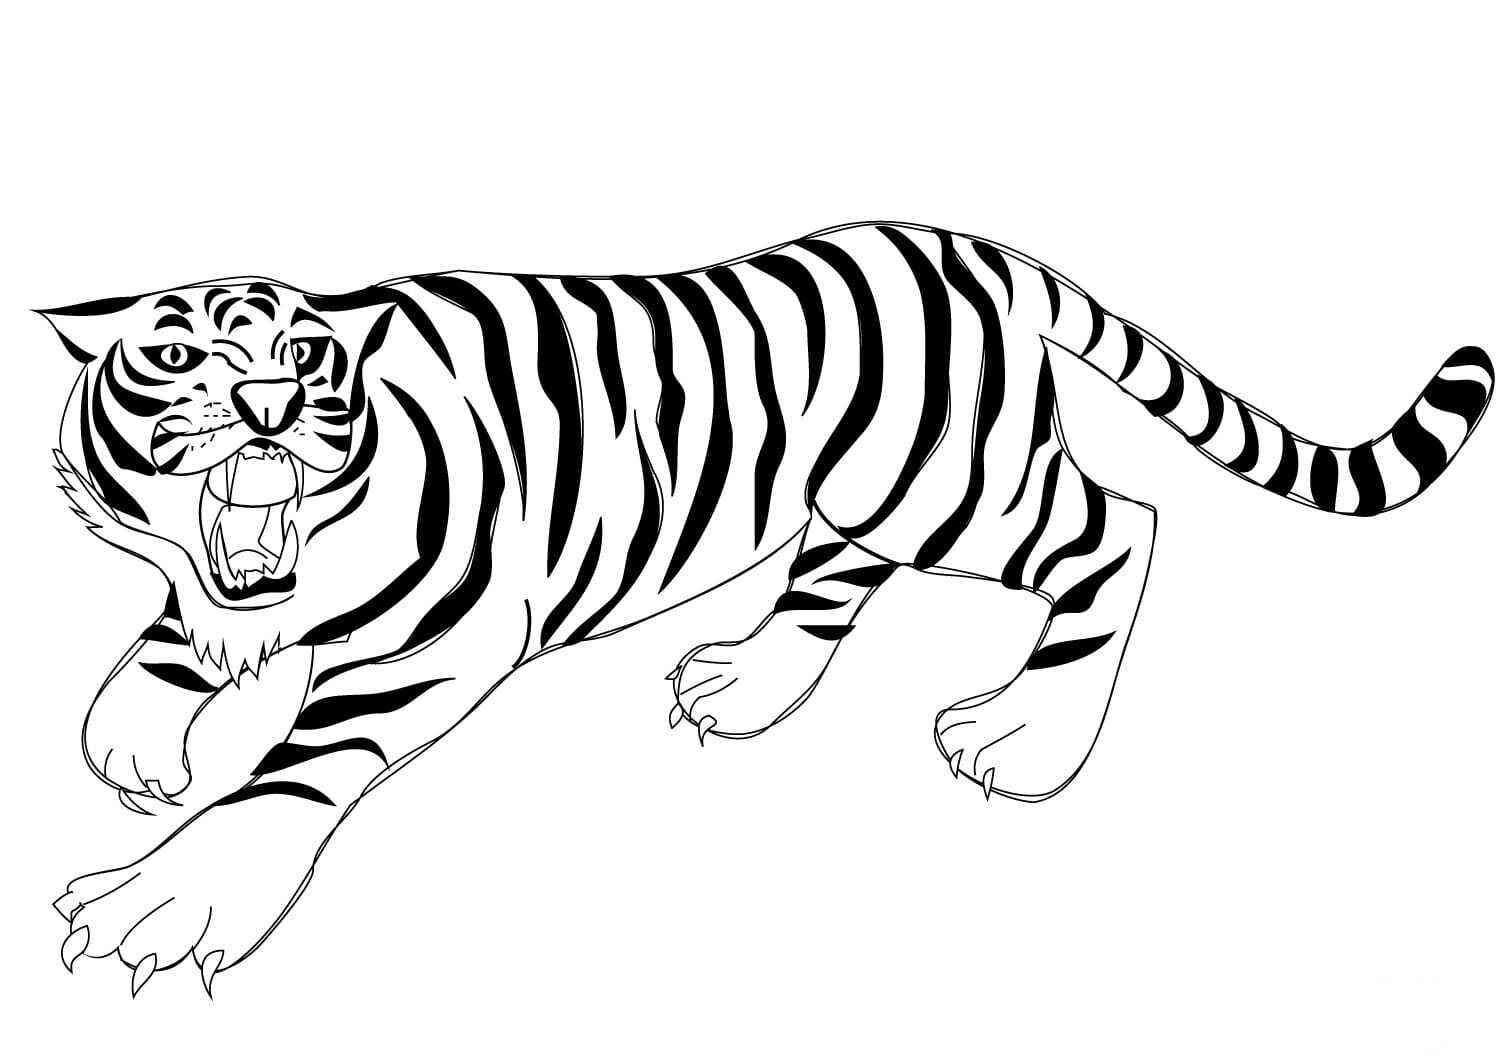 The tiger looks so ferocious Coloring Page